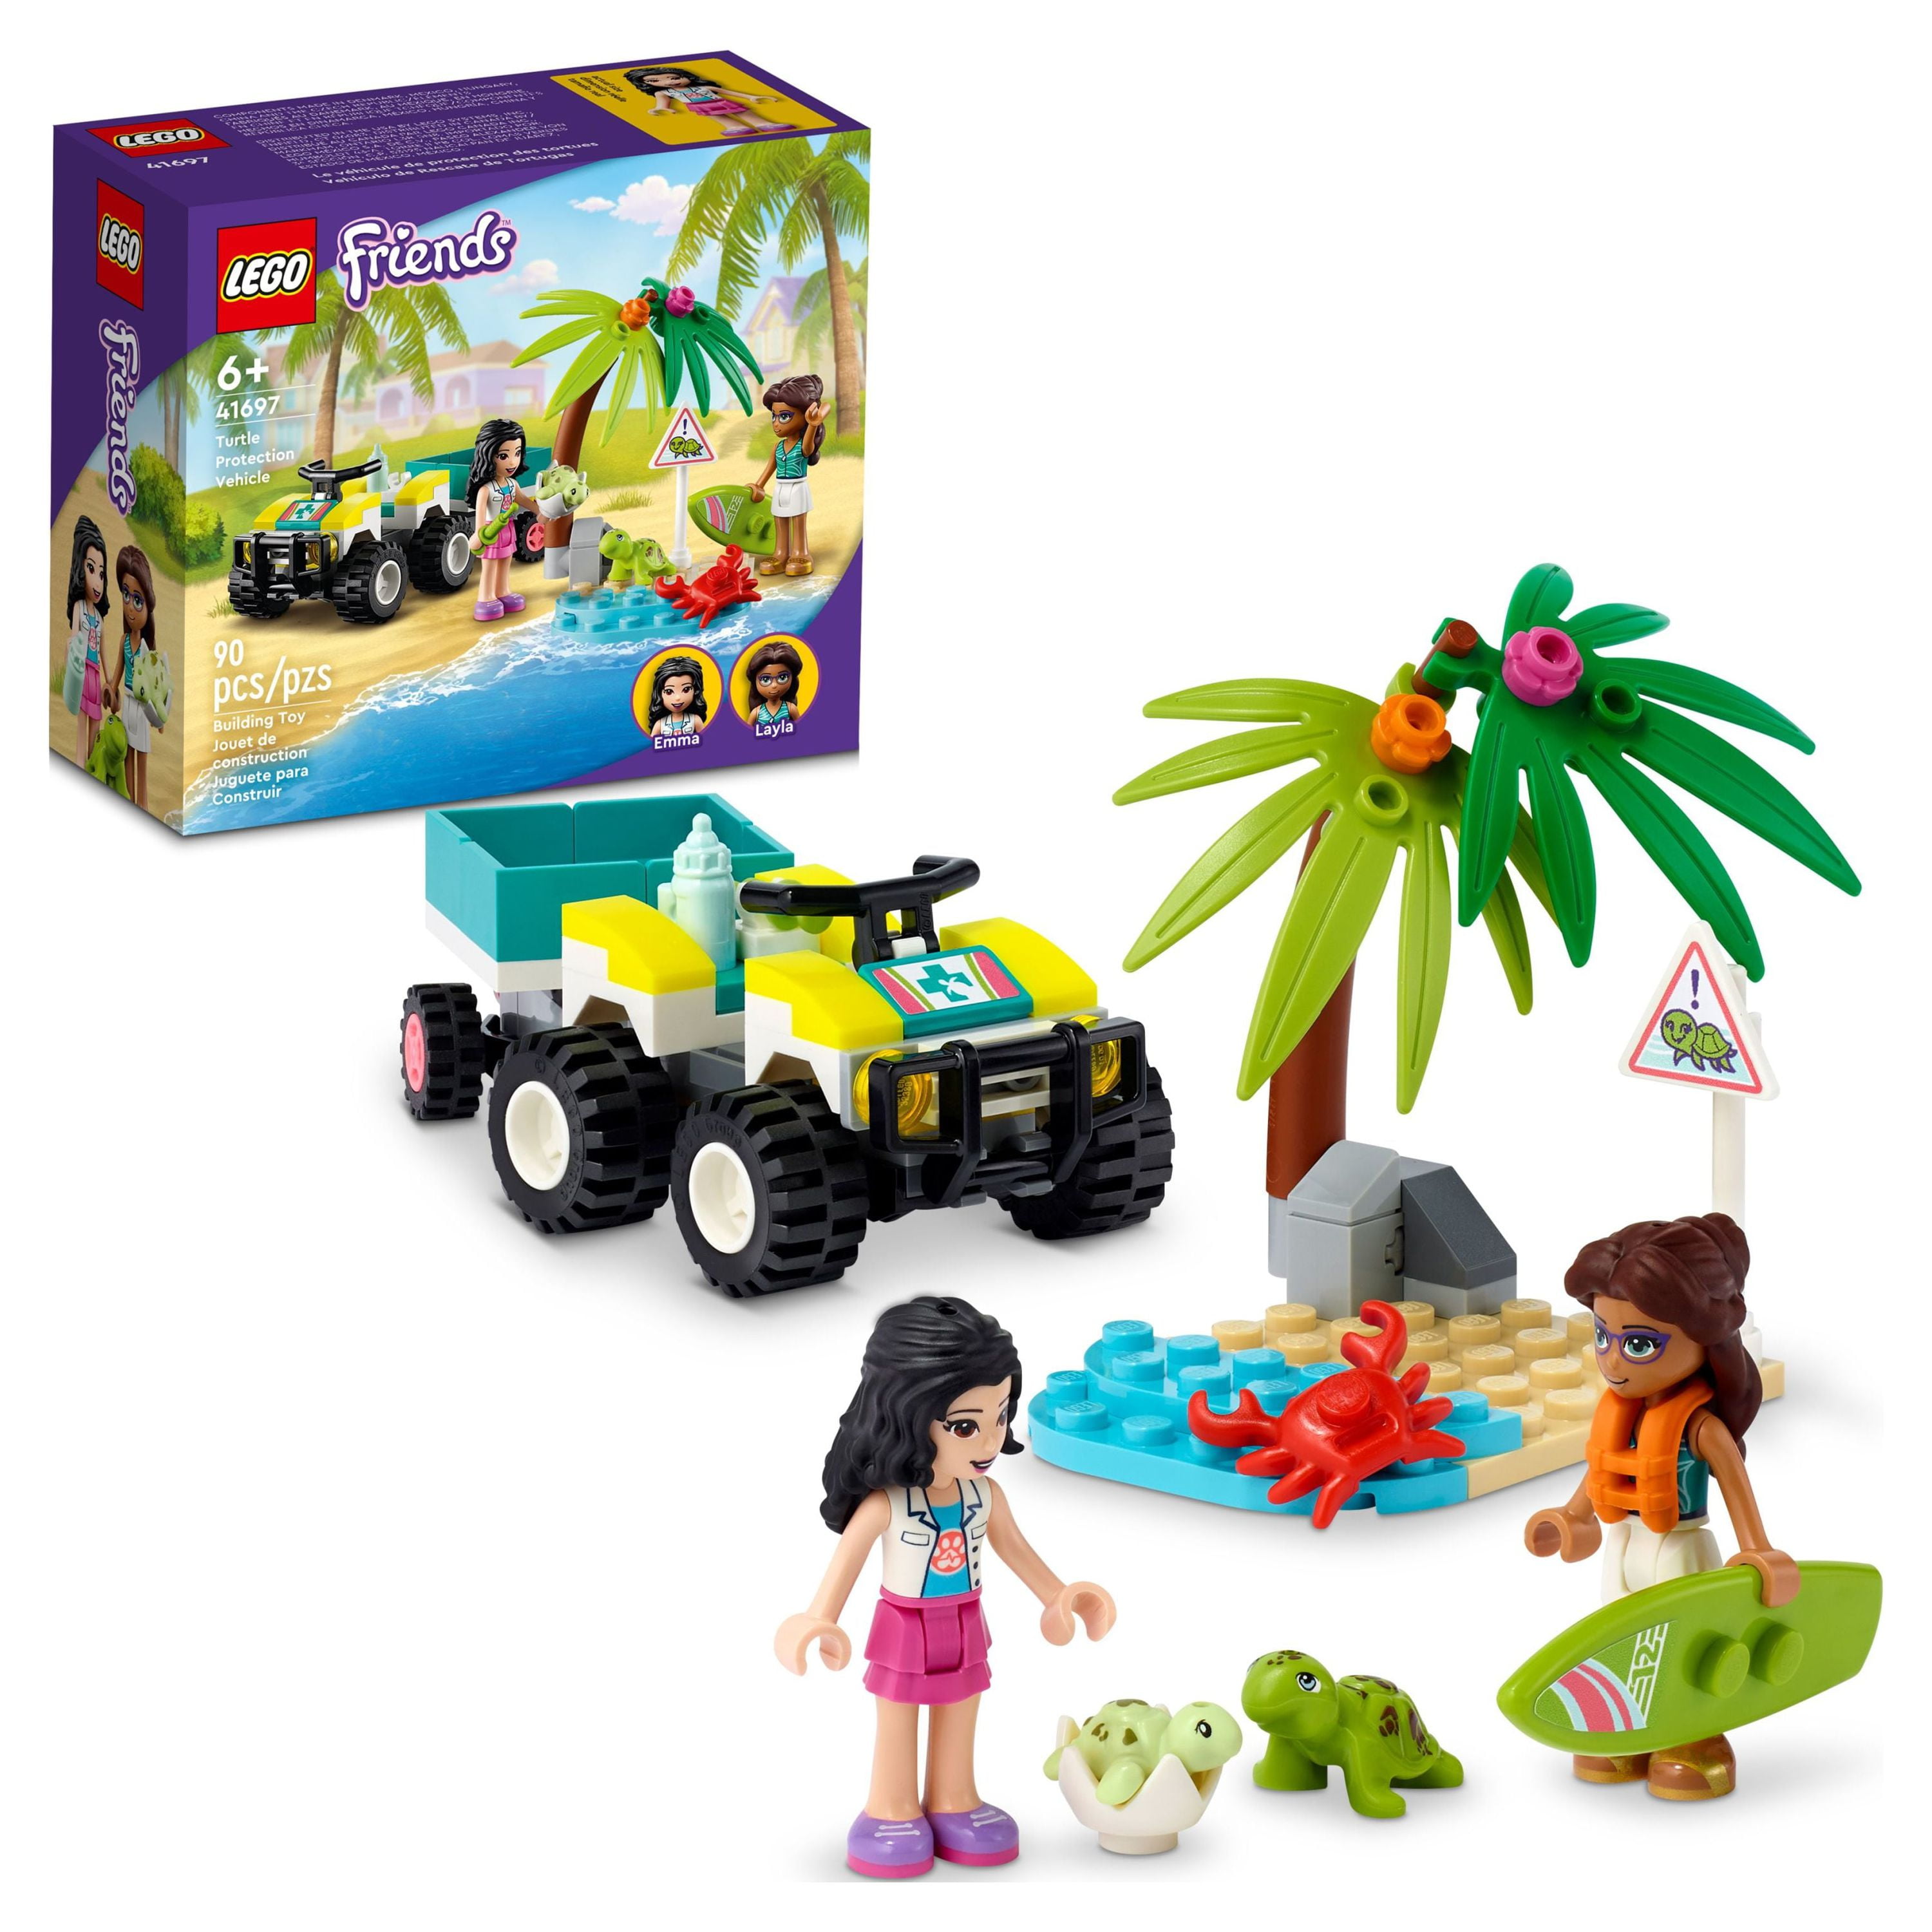 LEGO Friends Turtle Protection Vehicle , Animal Rescue Building Set  With ATV, Island, and 2 Mini Figures, Pretend Play Toy for Animal Loving